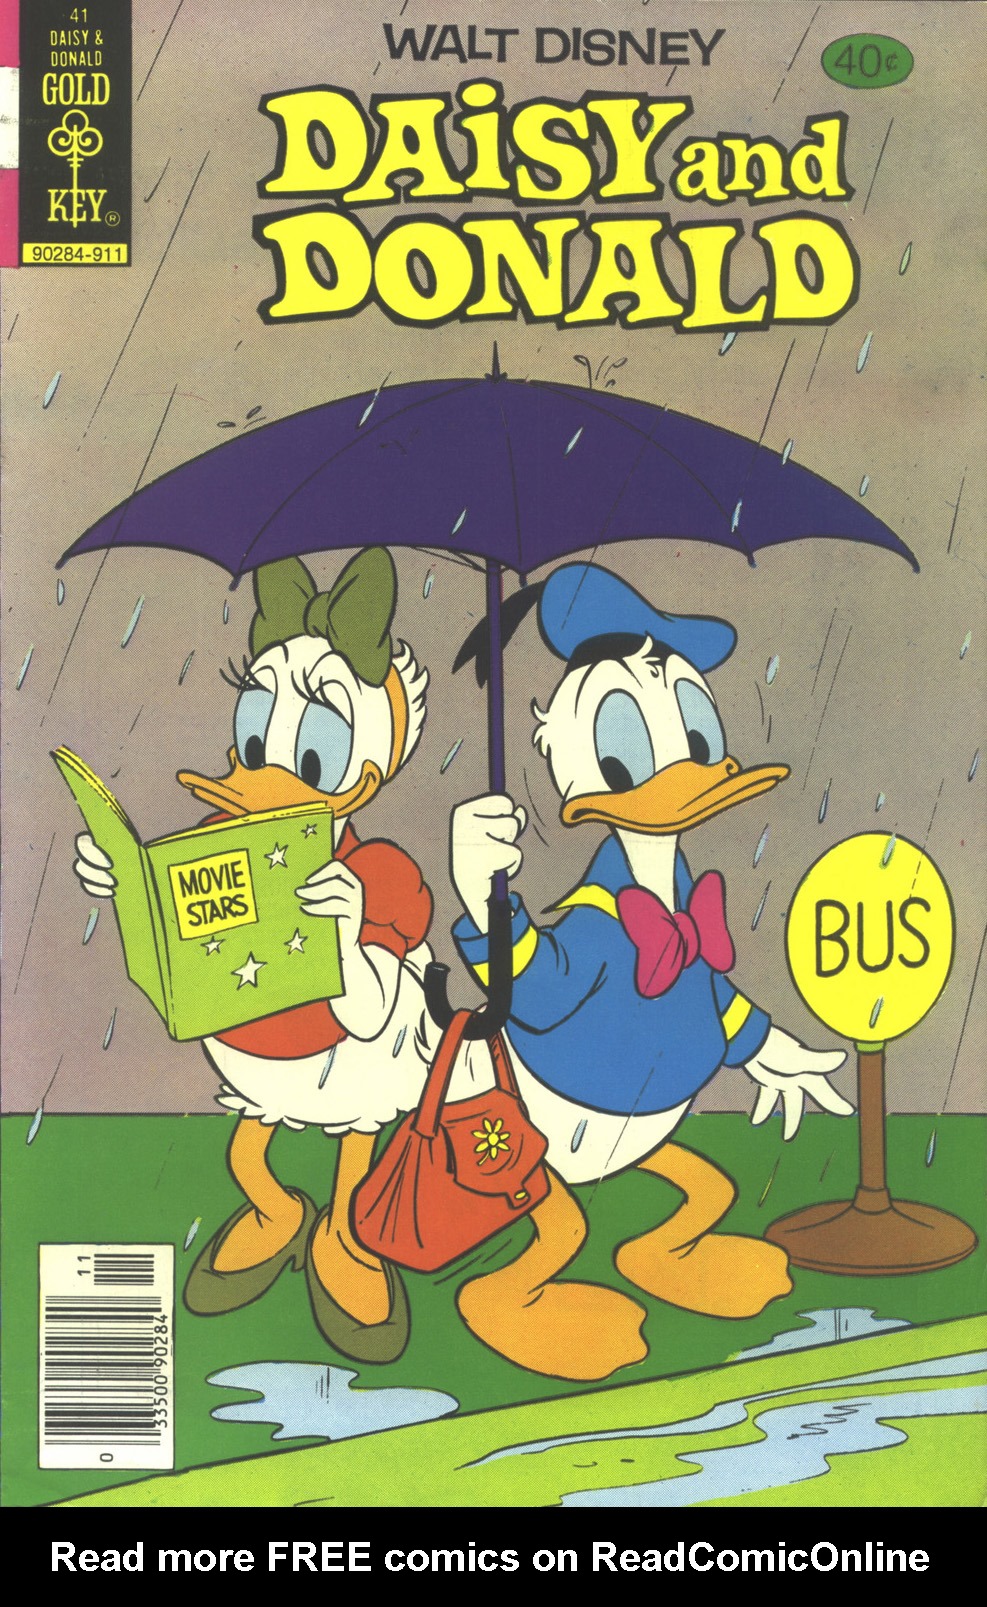 Read online Walt Disney Daisy and Donald comic -  Issue #41 - 1